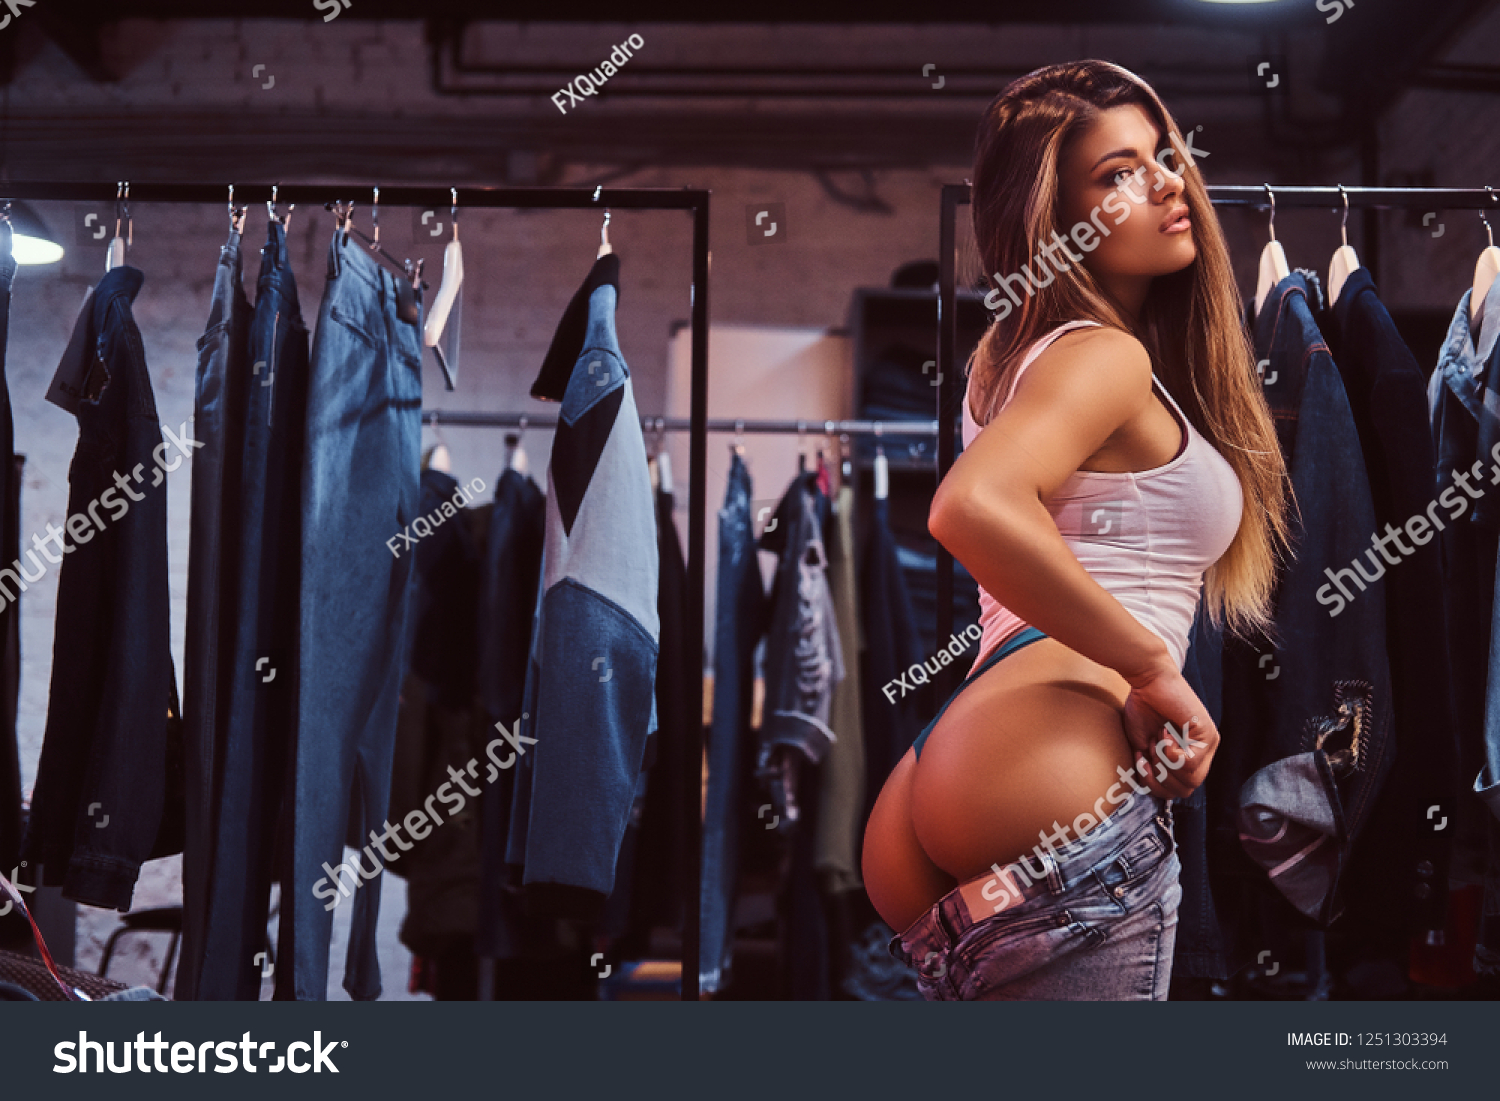 Best of Woman pulling down pants